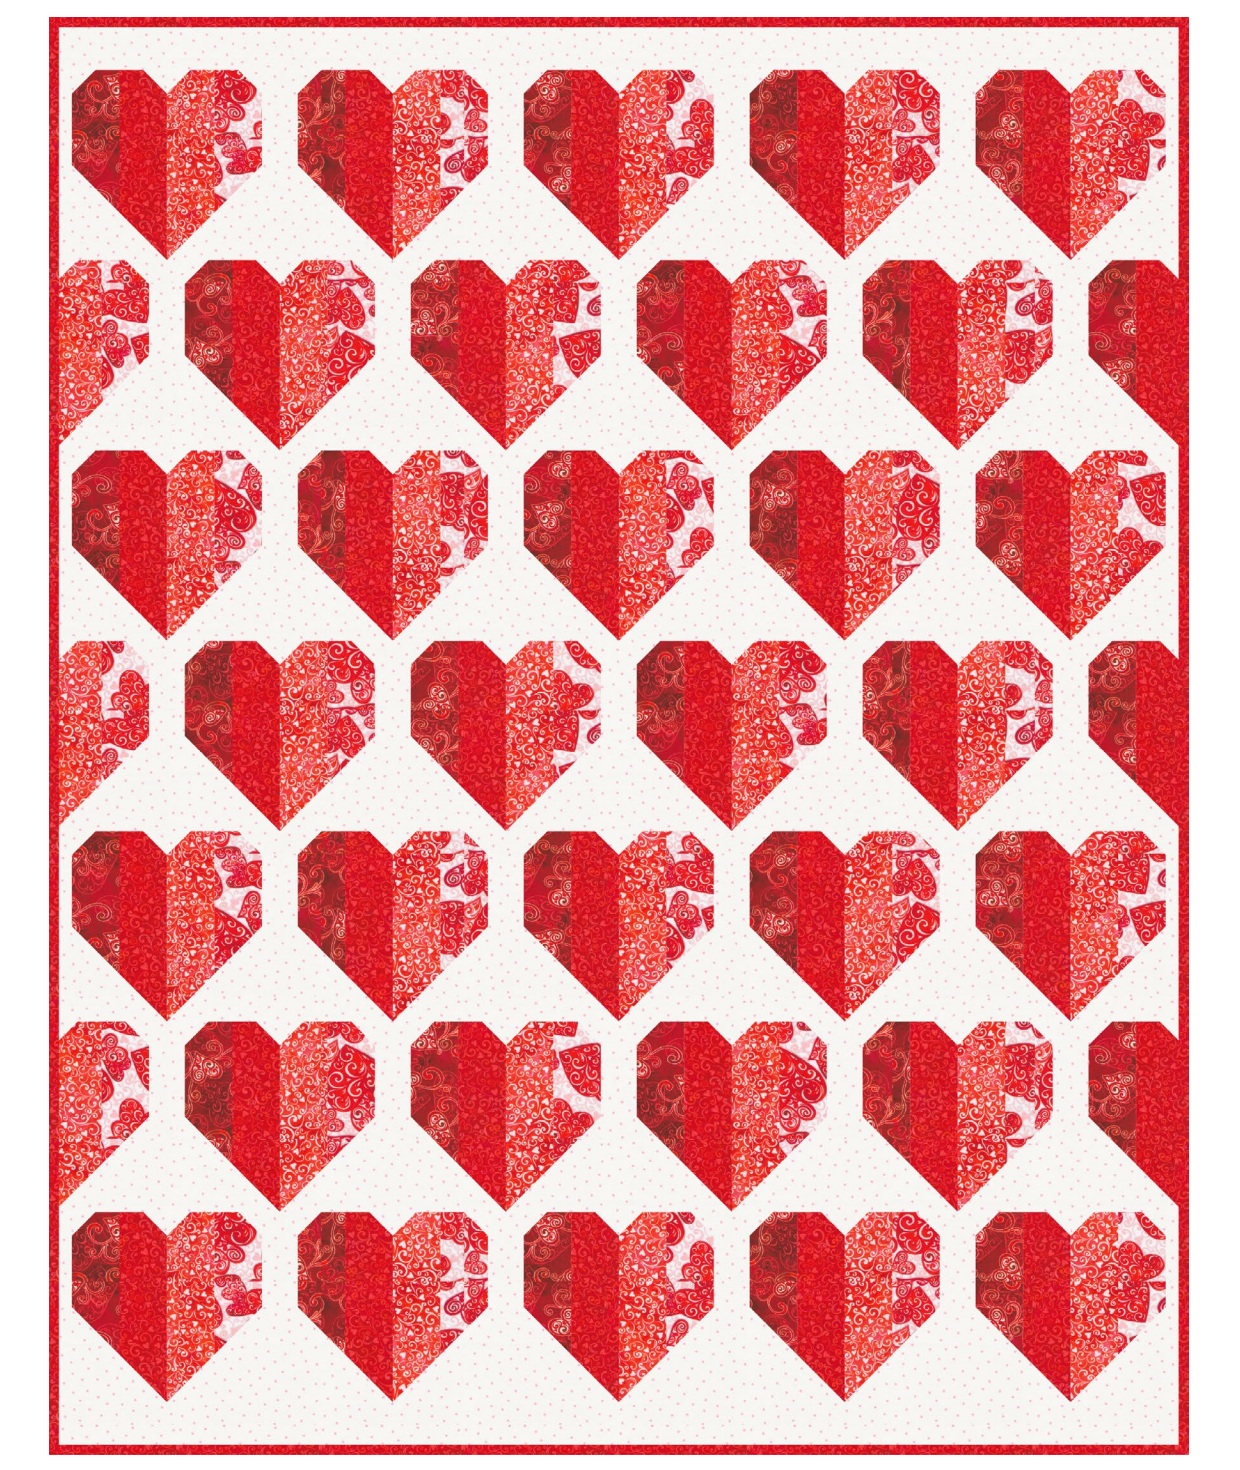 Infinite Hearts by QuiltyLoveShop.com - heart quilt patterns